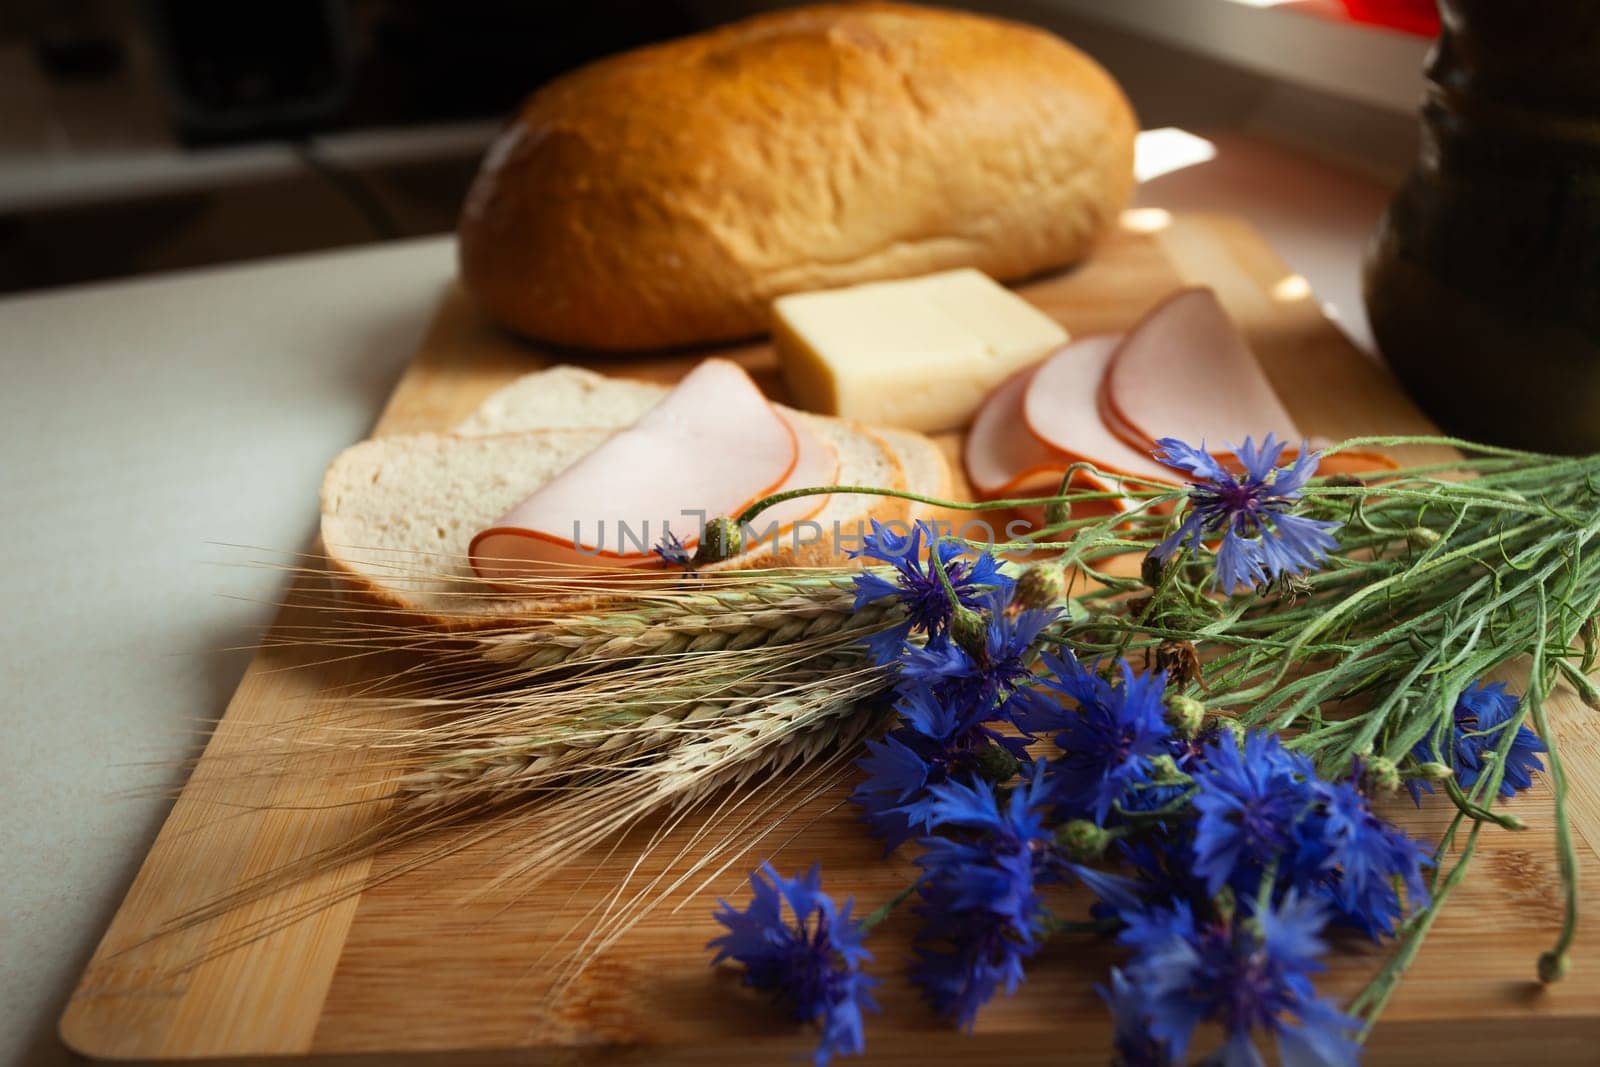 Ham sandwiches next to a loaf of bread with cereal and cornflower flowers lying on a wooden cutting board